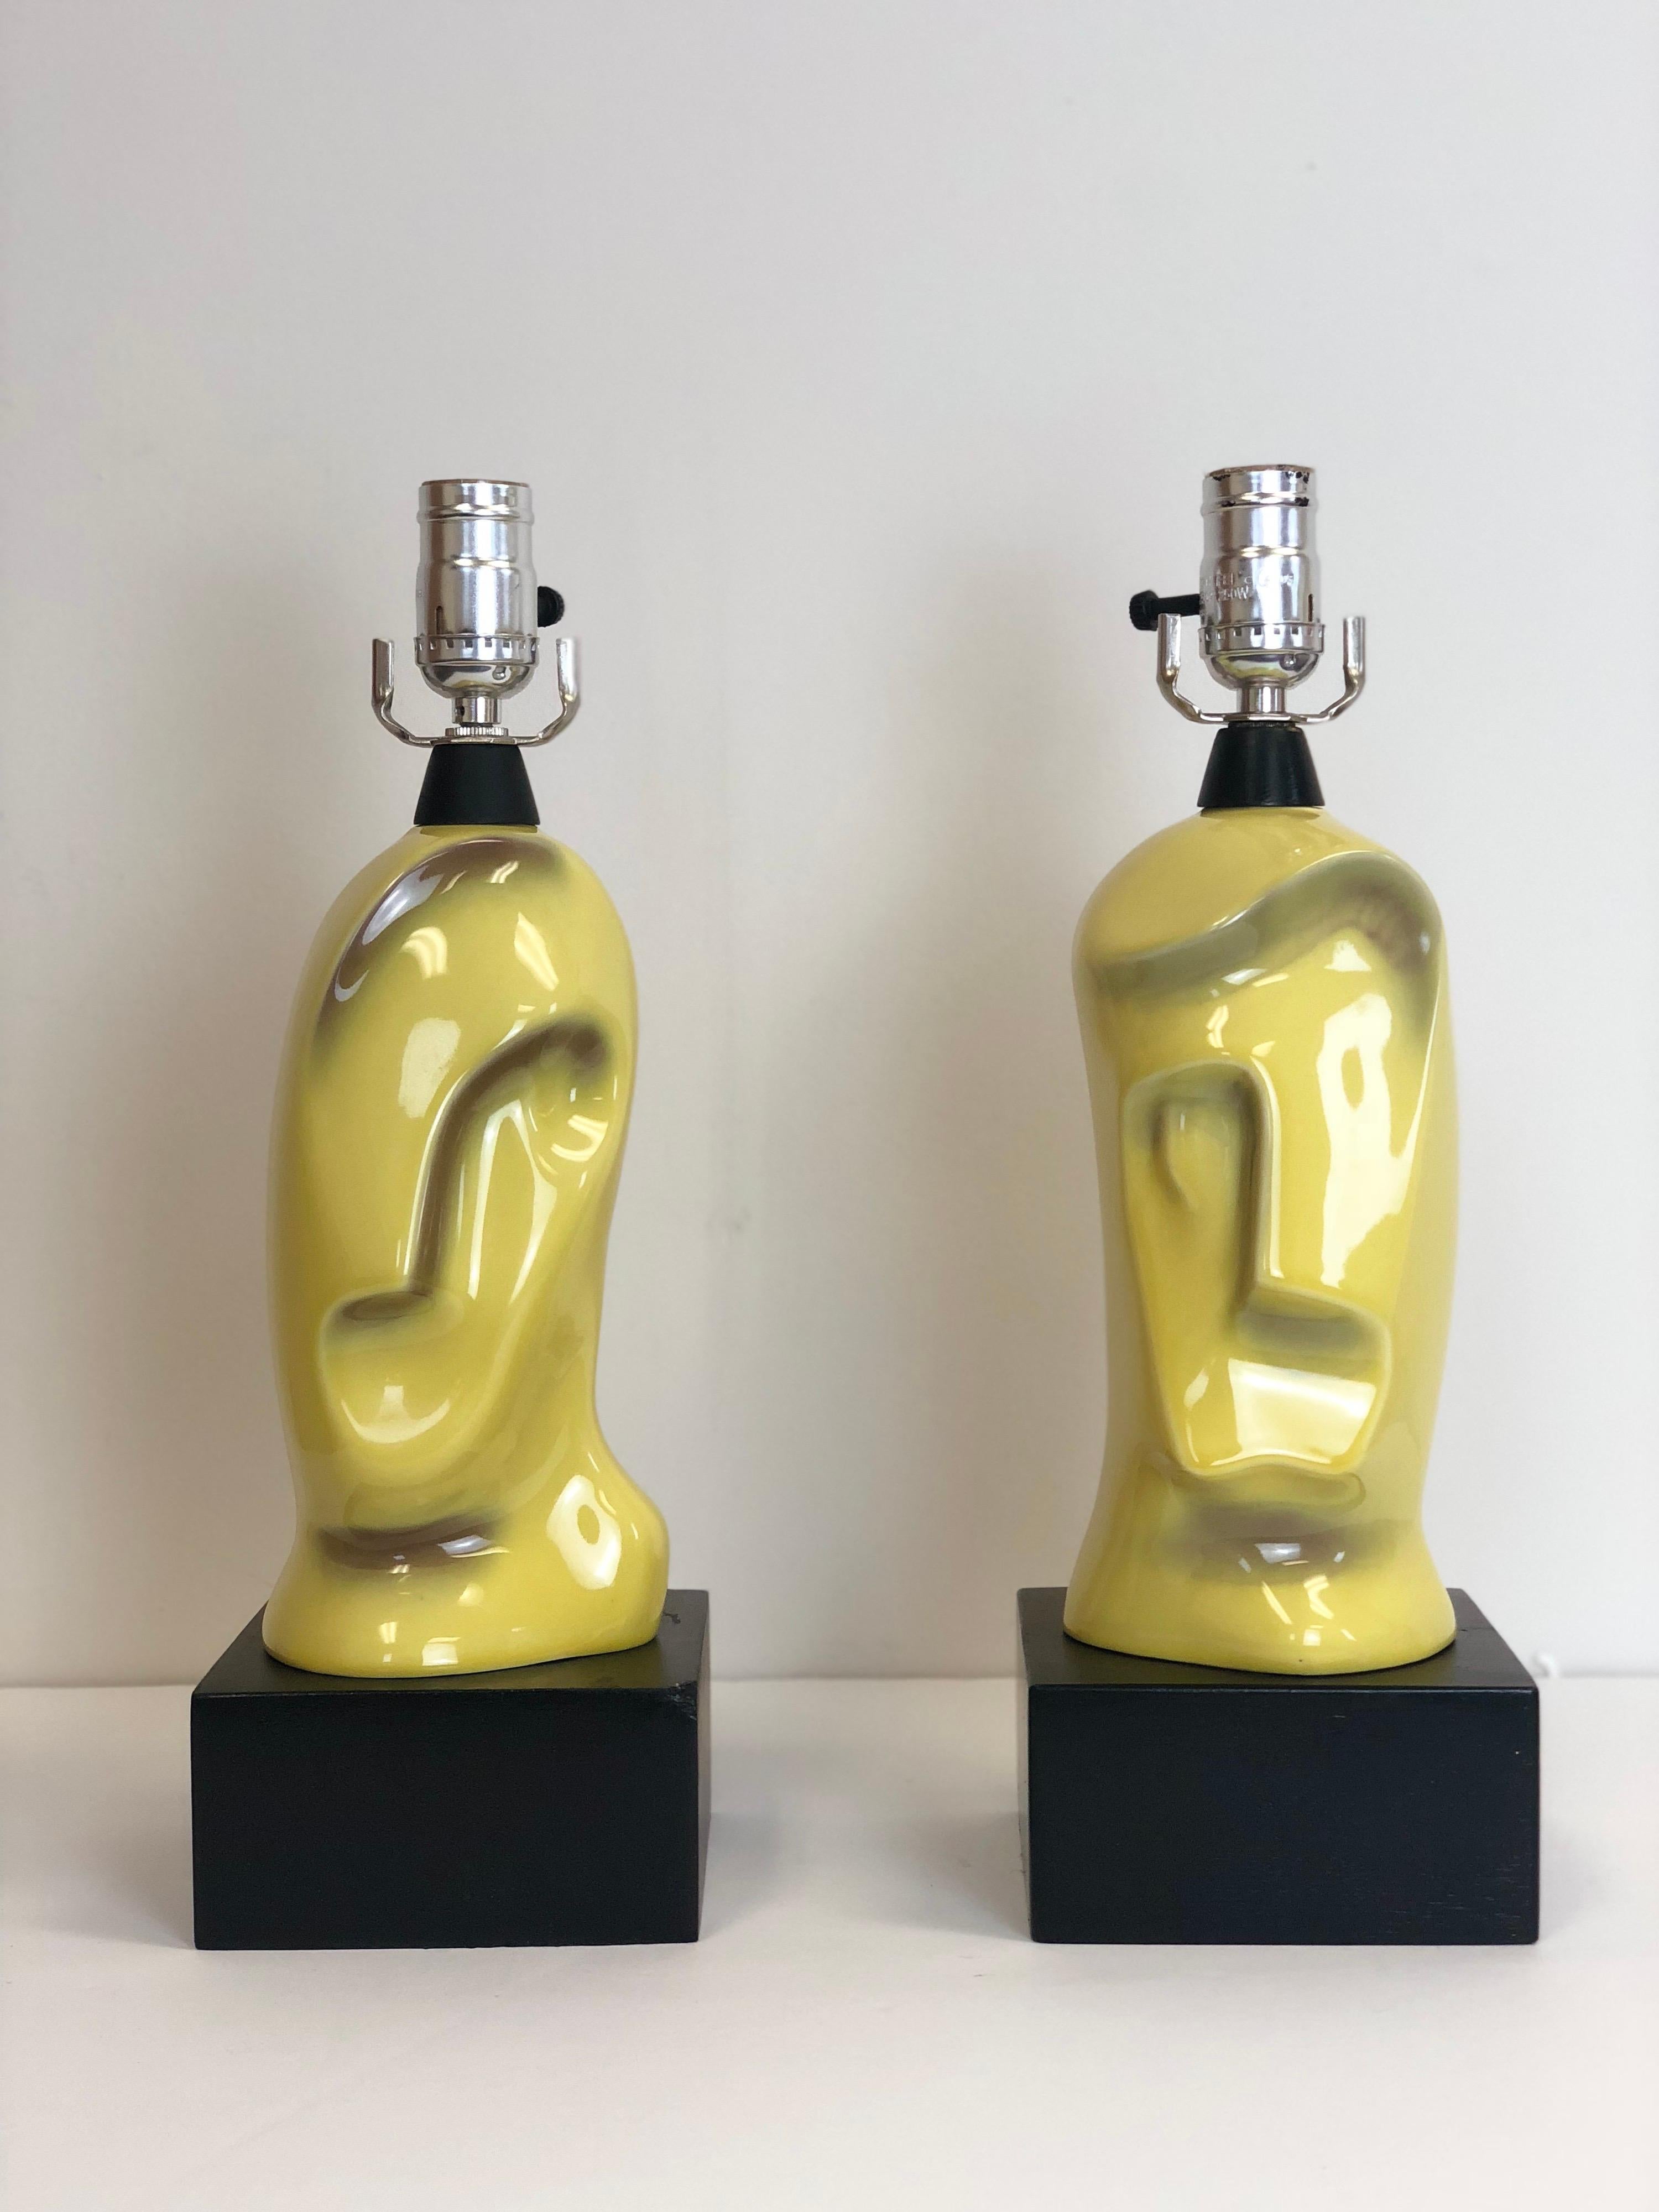 We are very pleased to offer a pair of abstract, ceramic face table lamps by Yasha Heifetz, circa the 1950s. One lamp showcases a woman and the other the face of a man. These modernist table lamps are glazed in a light green. New 14” drum shades in